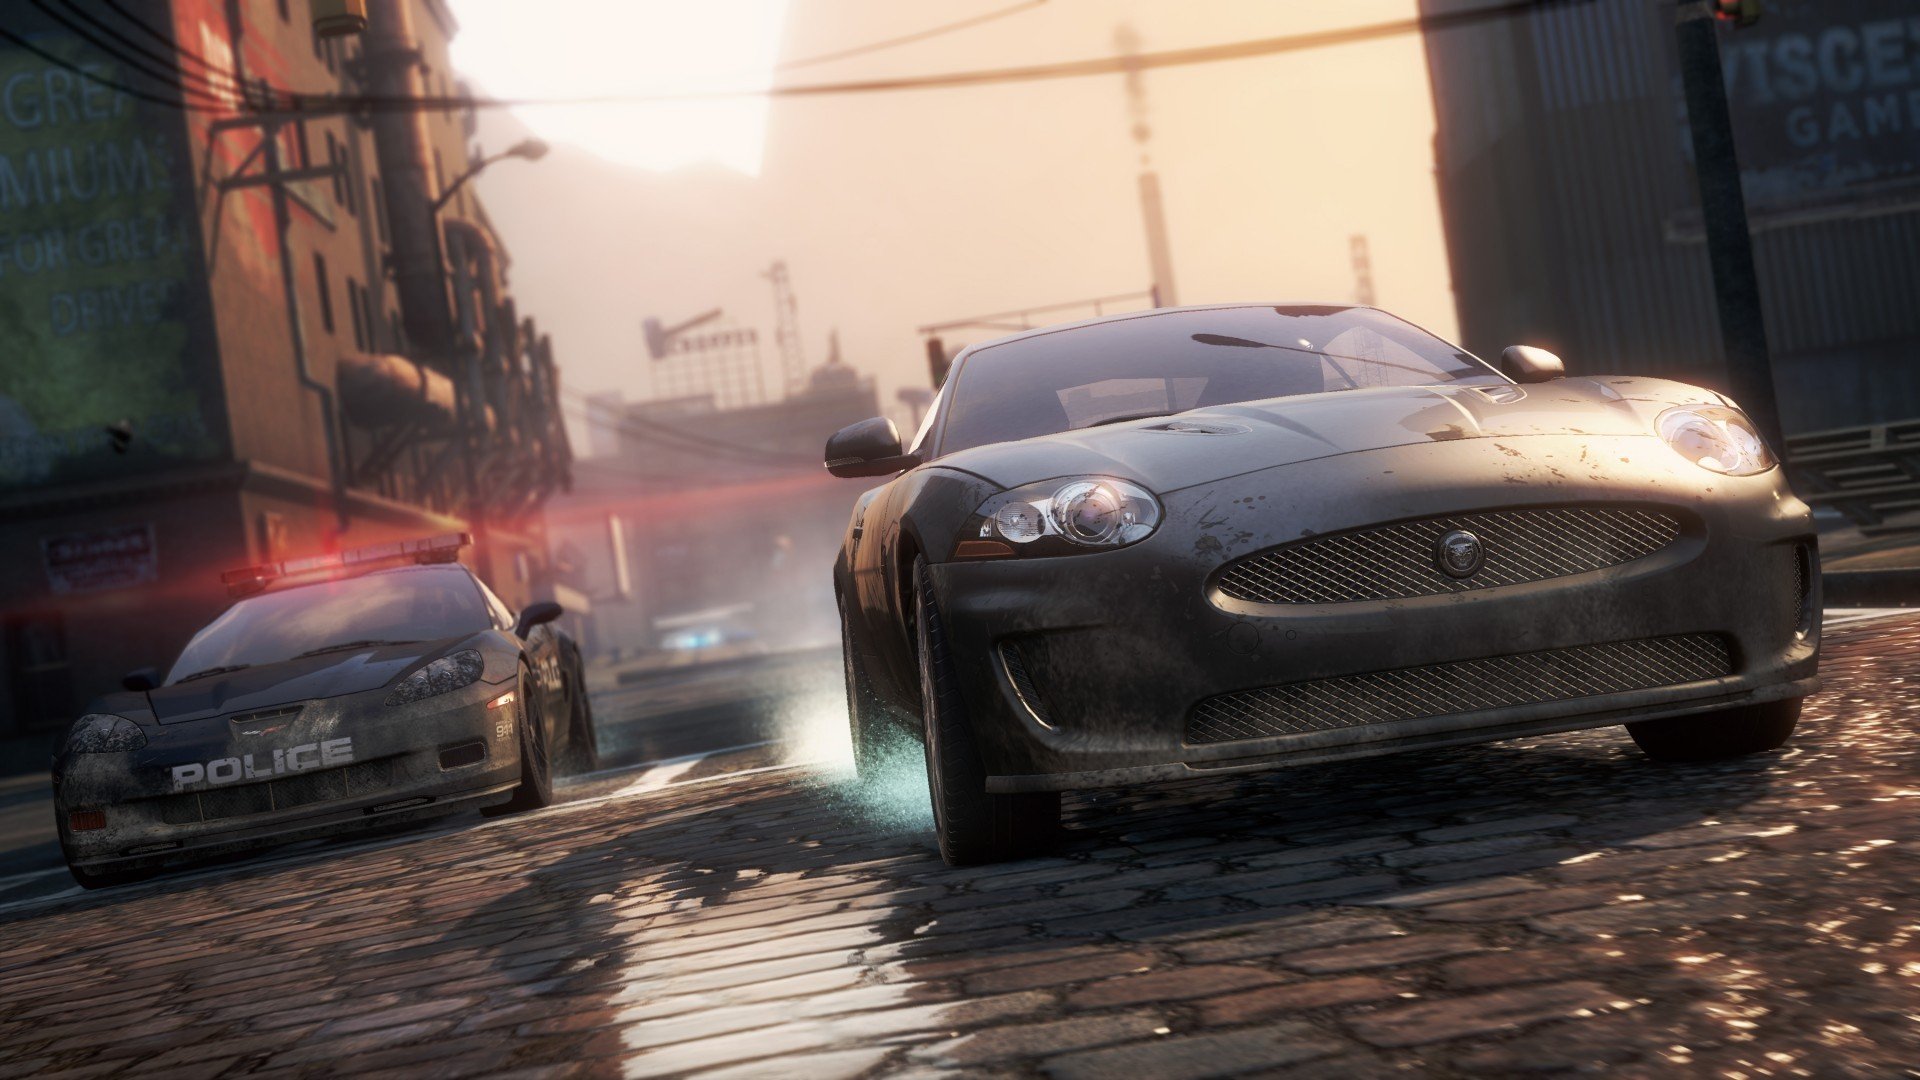 Download hd 1920x1080 Need For Speed: Most Wanted desktop background ID:137099 for free